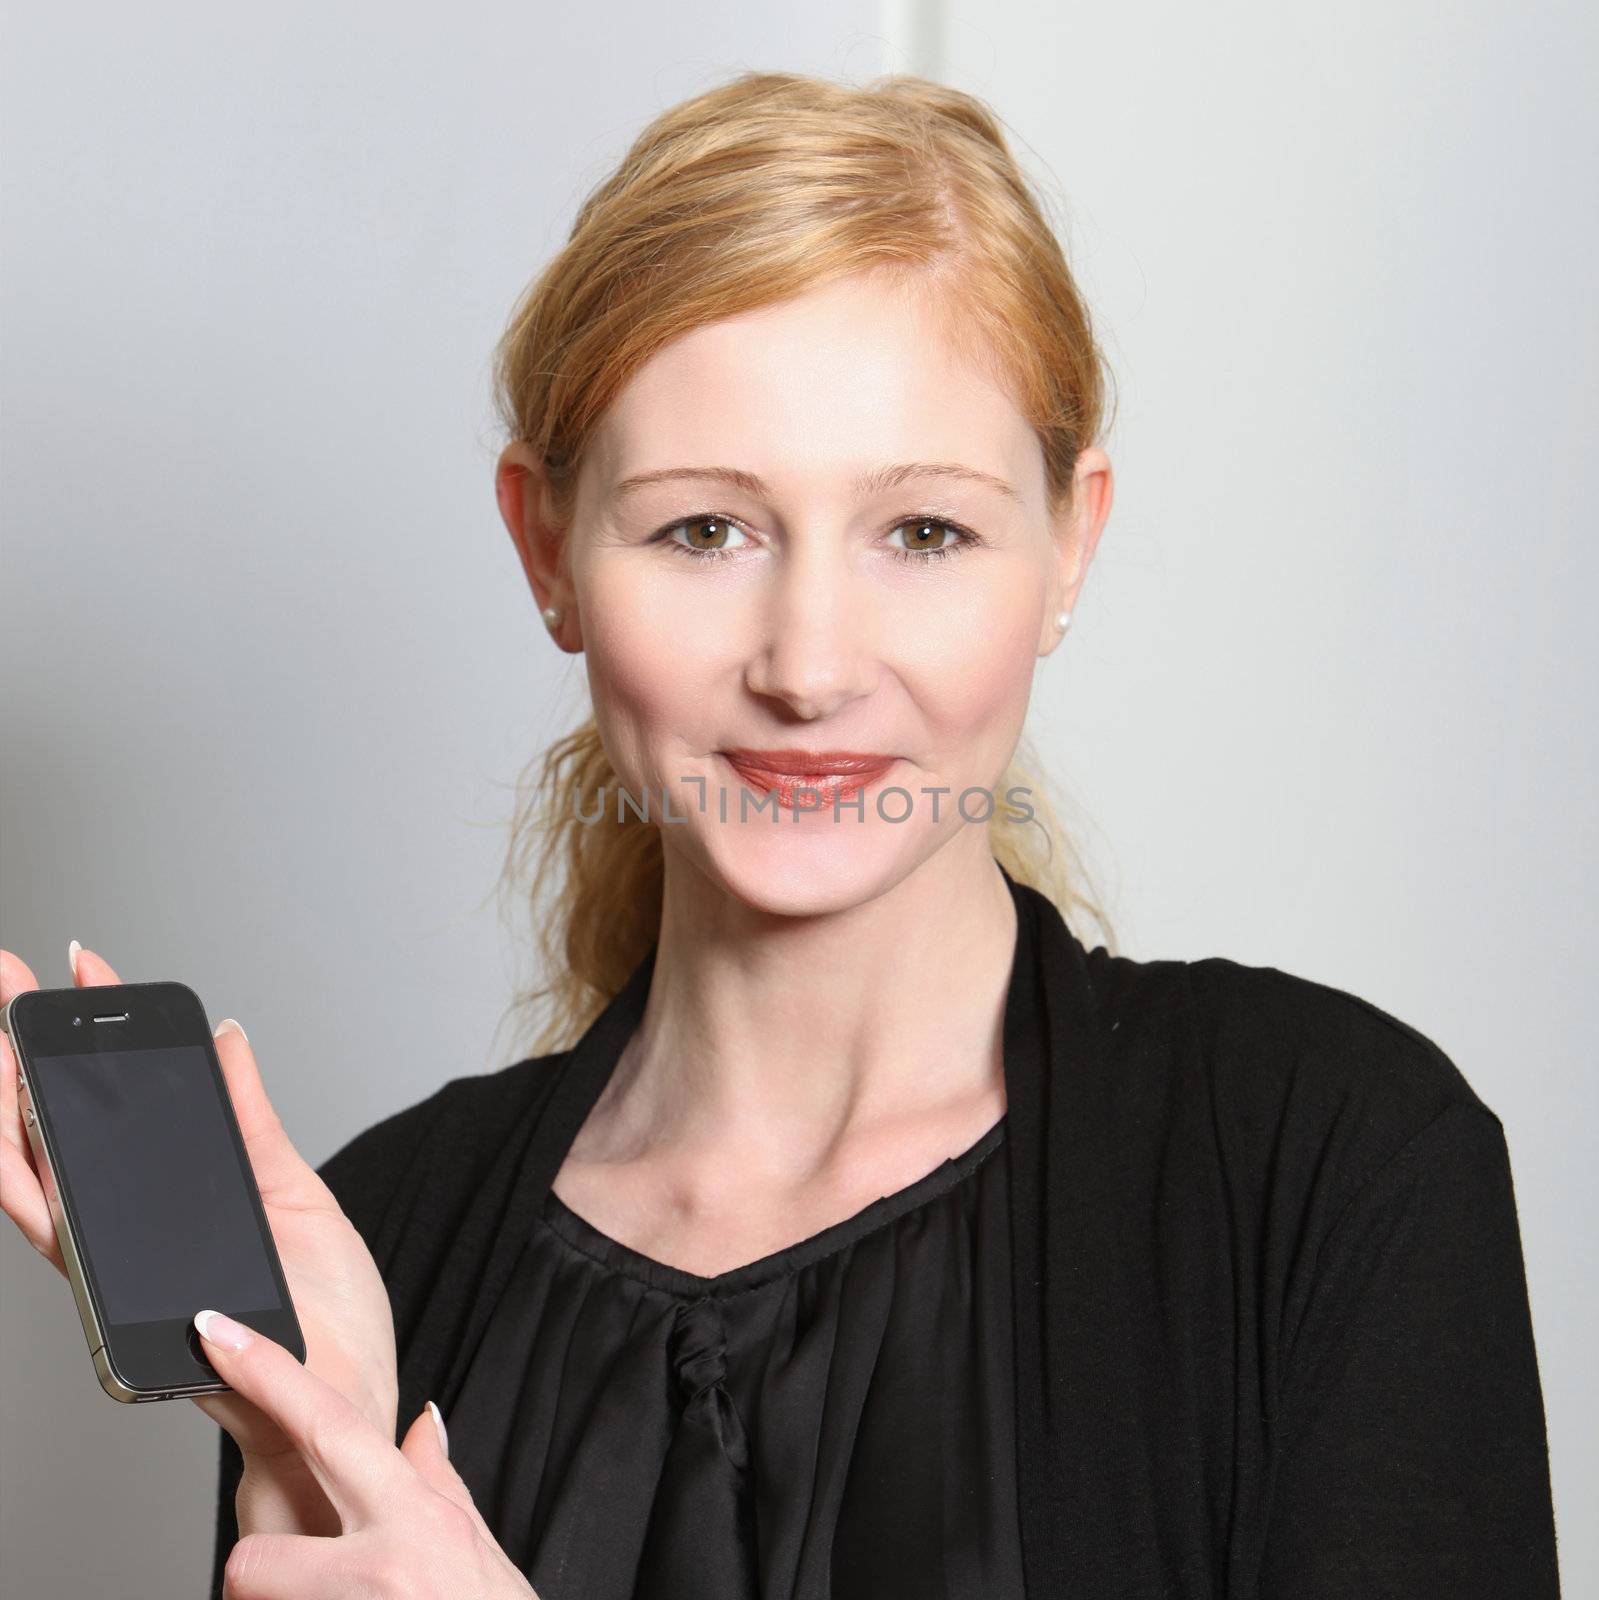 Young, smiling woman presented their smartphone - square
